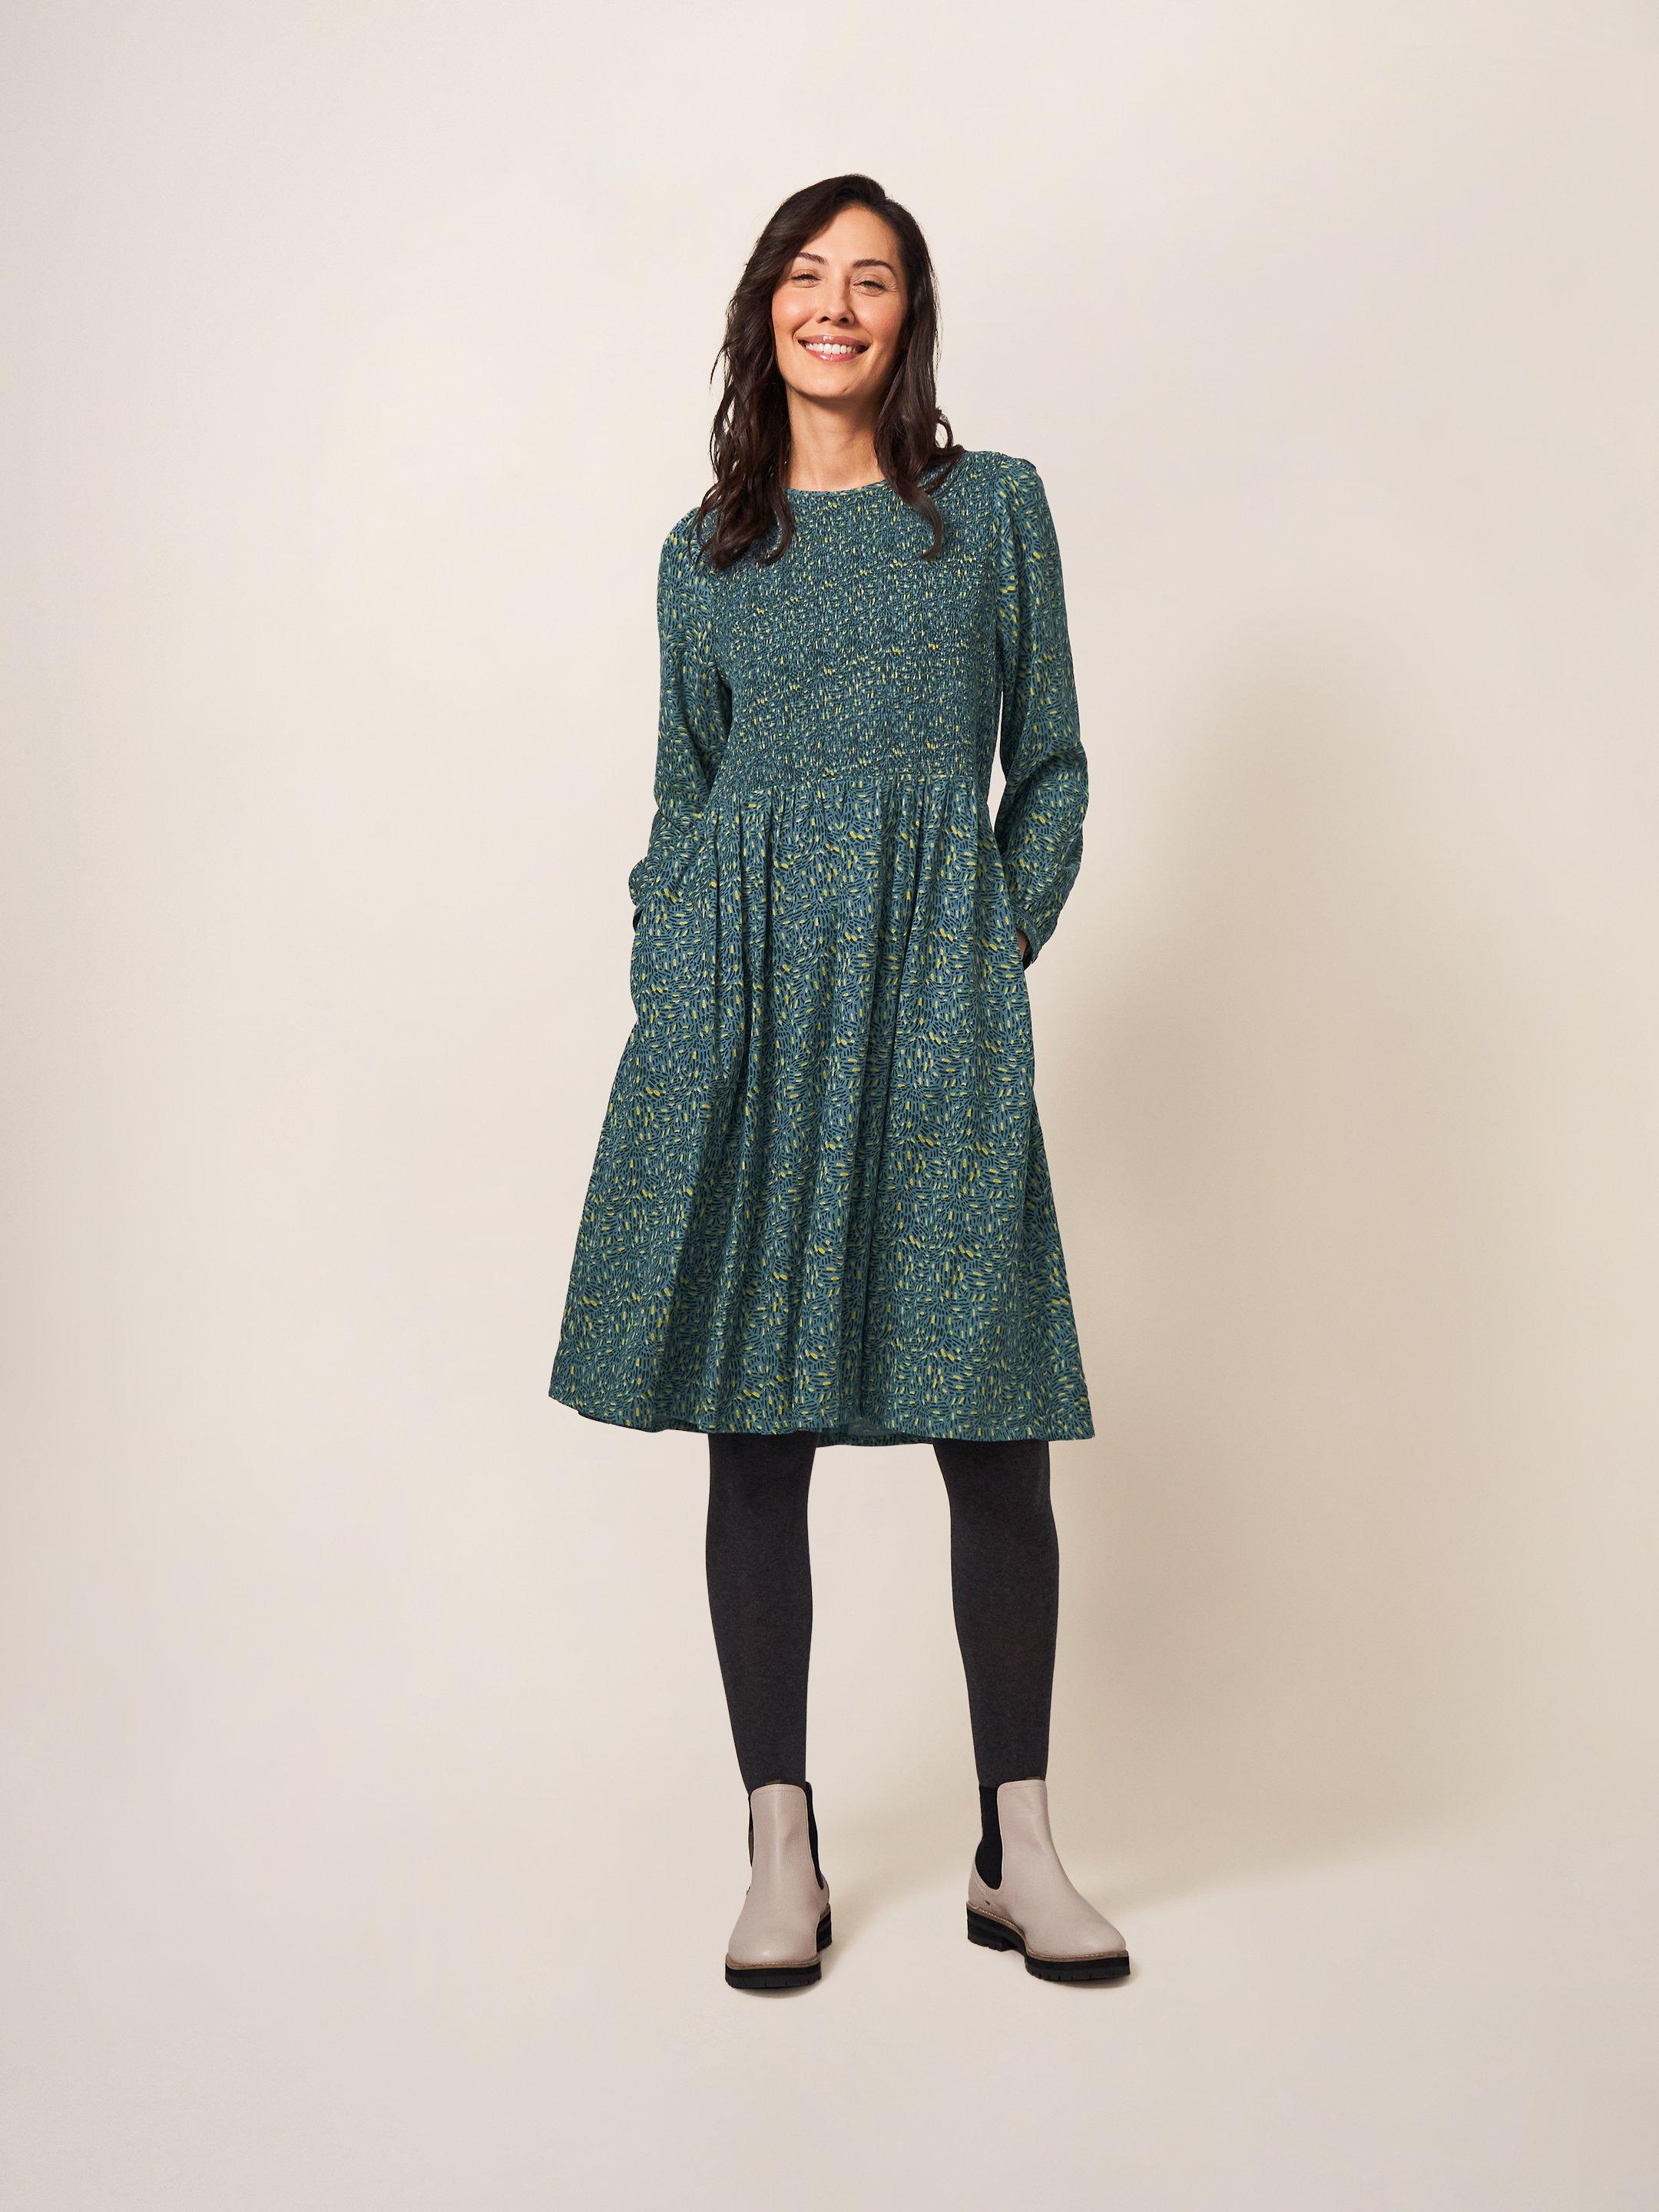 Aneth Eco Vero Shirred Dress in TEAL PR - MODEL FRONT